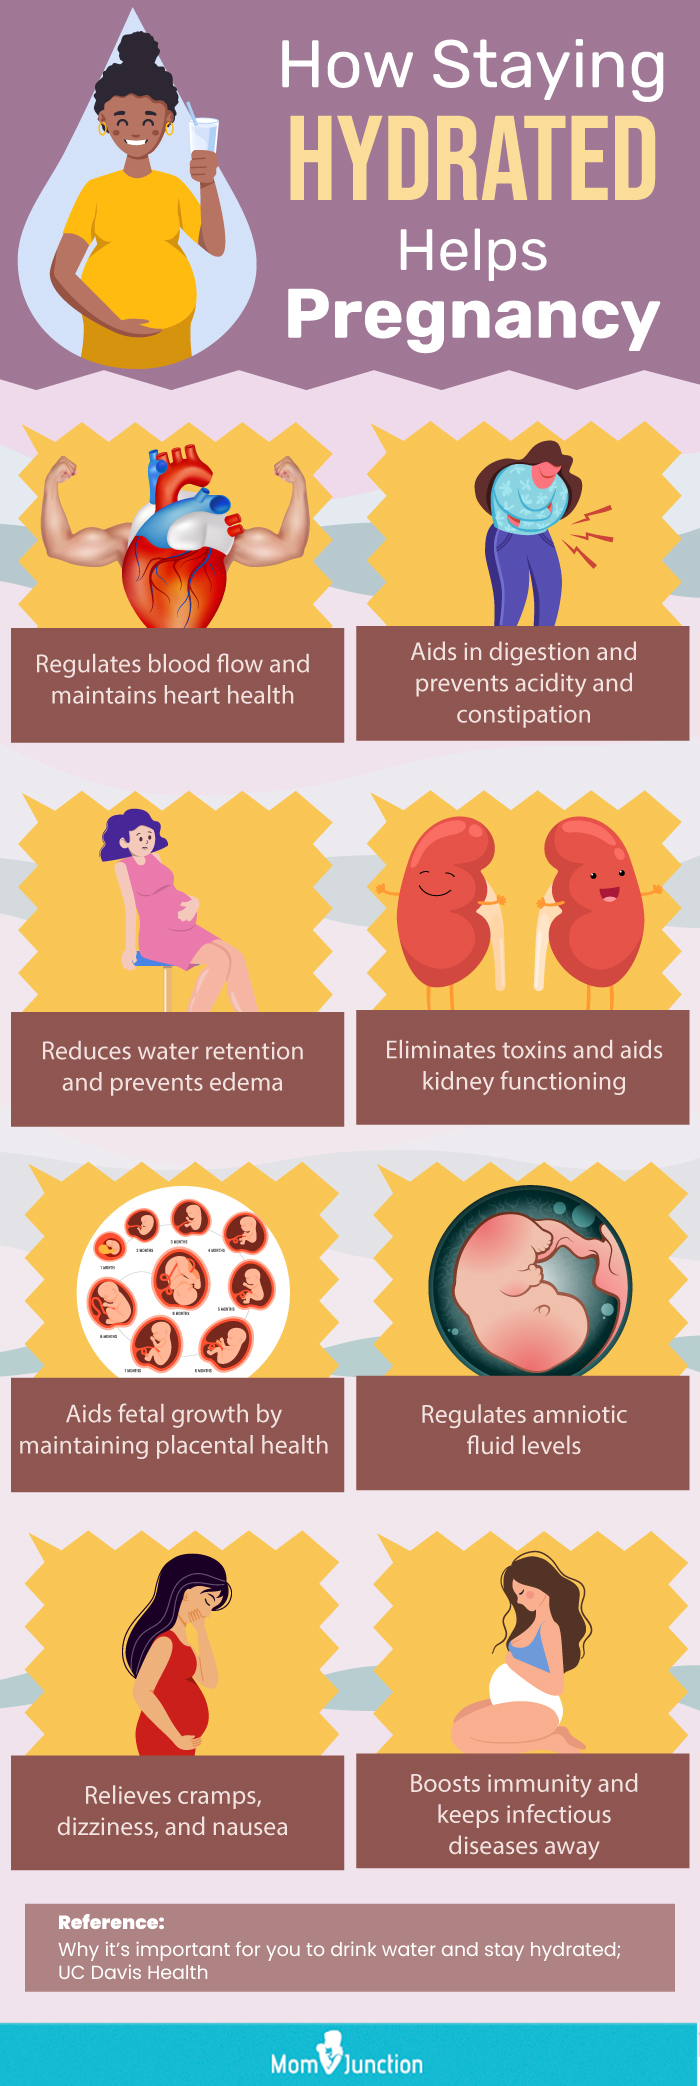 What Your Body Is Really Craving During Pregnancy, St. Luke's Health